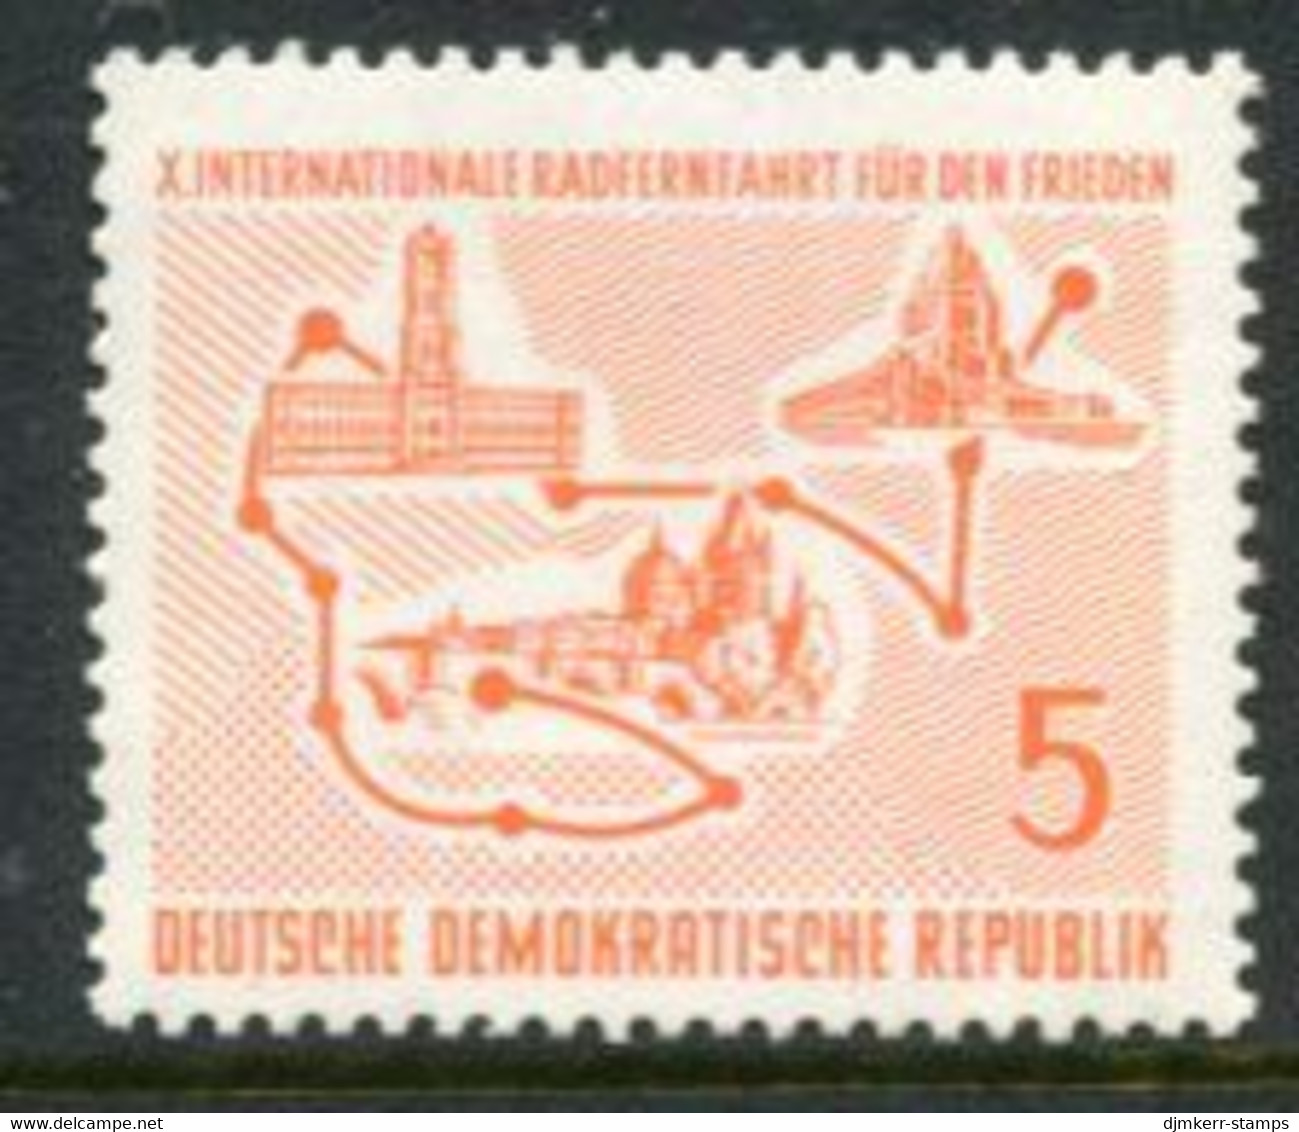 DDR / E. GERMANY 1957 Peace Cycle Tour MNH / **.  Michel  568 - Nuevos